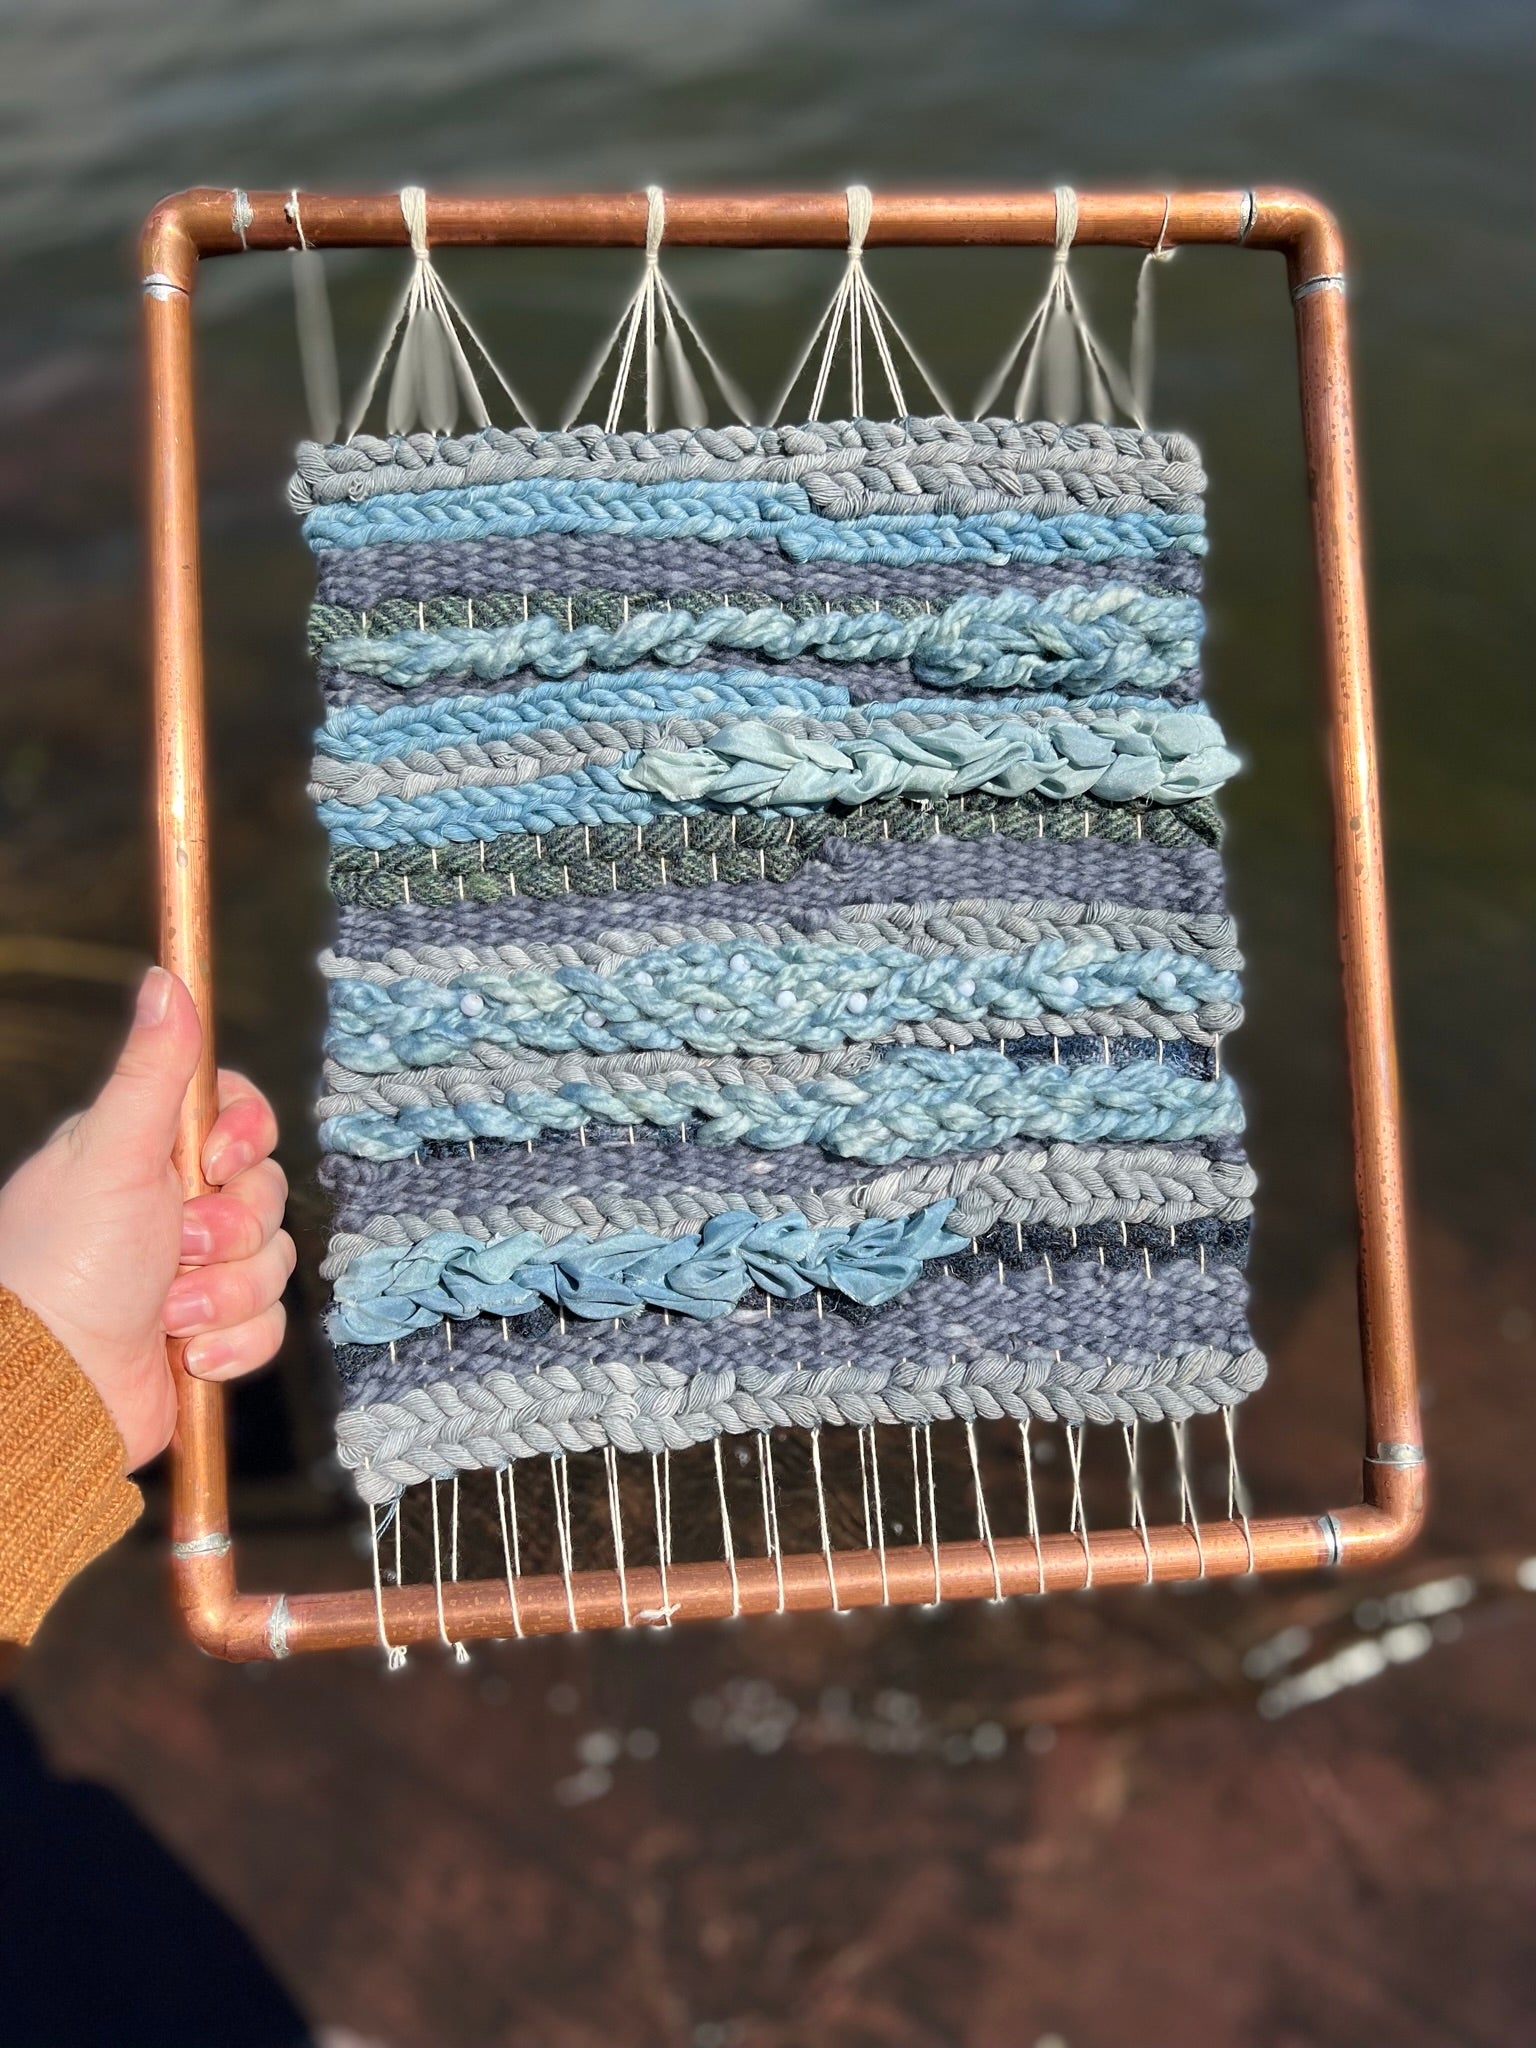 Naturally Dyed Indigo and Logwood Woven Wall Hanging with Blue Lace Agate and Harris Tweed in Custom Copper Frame